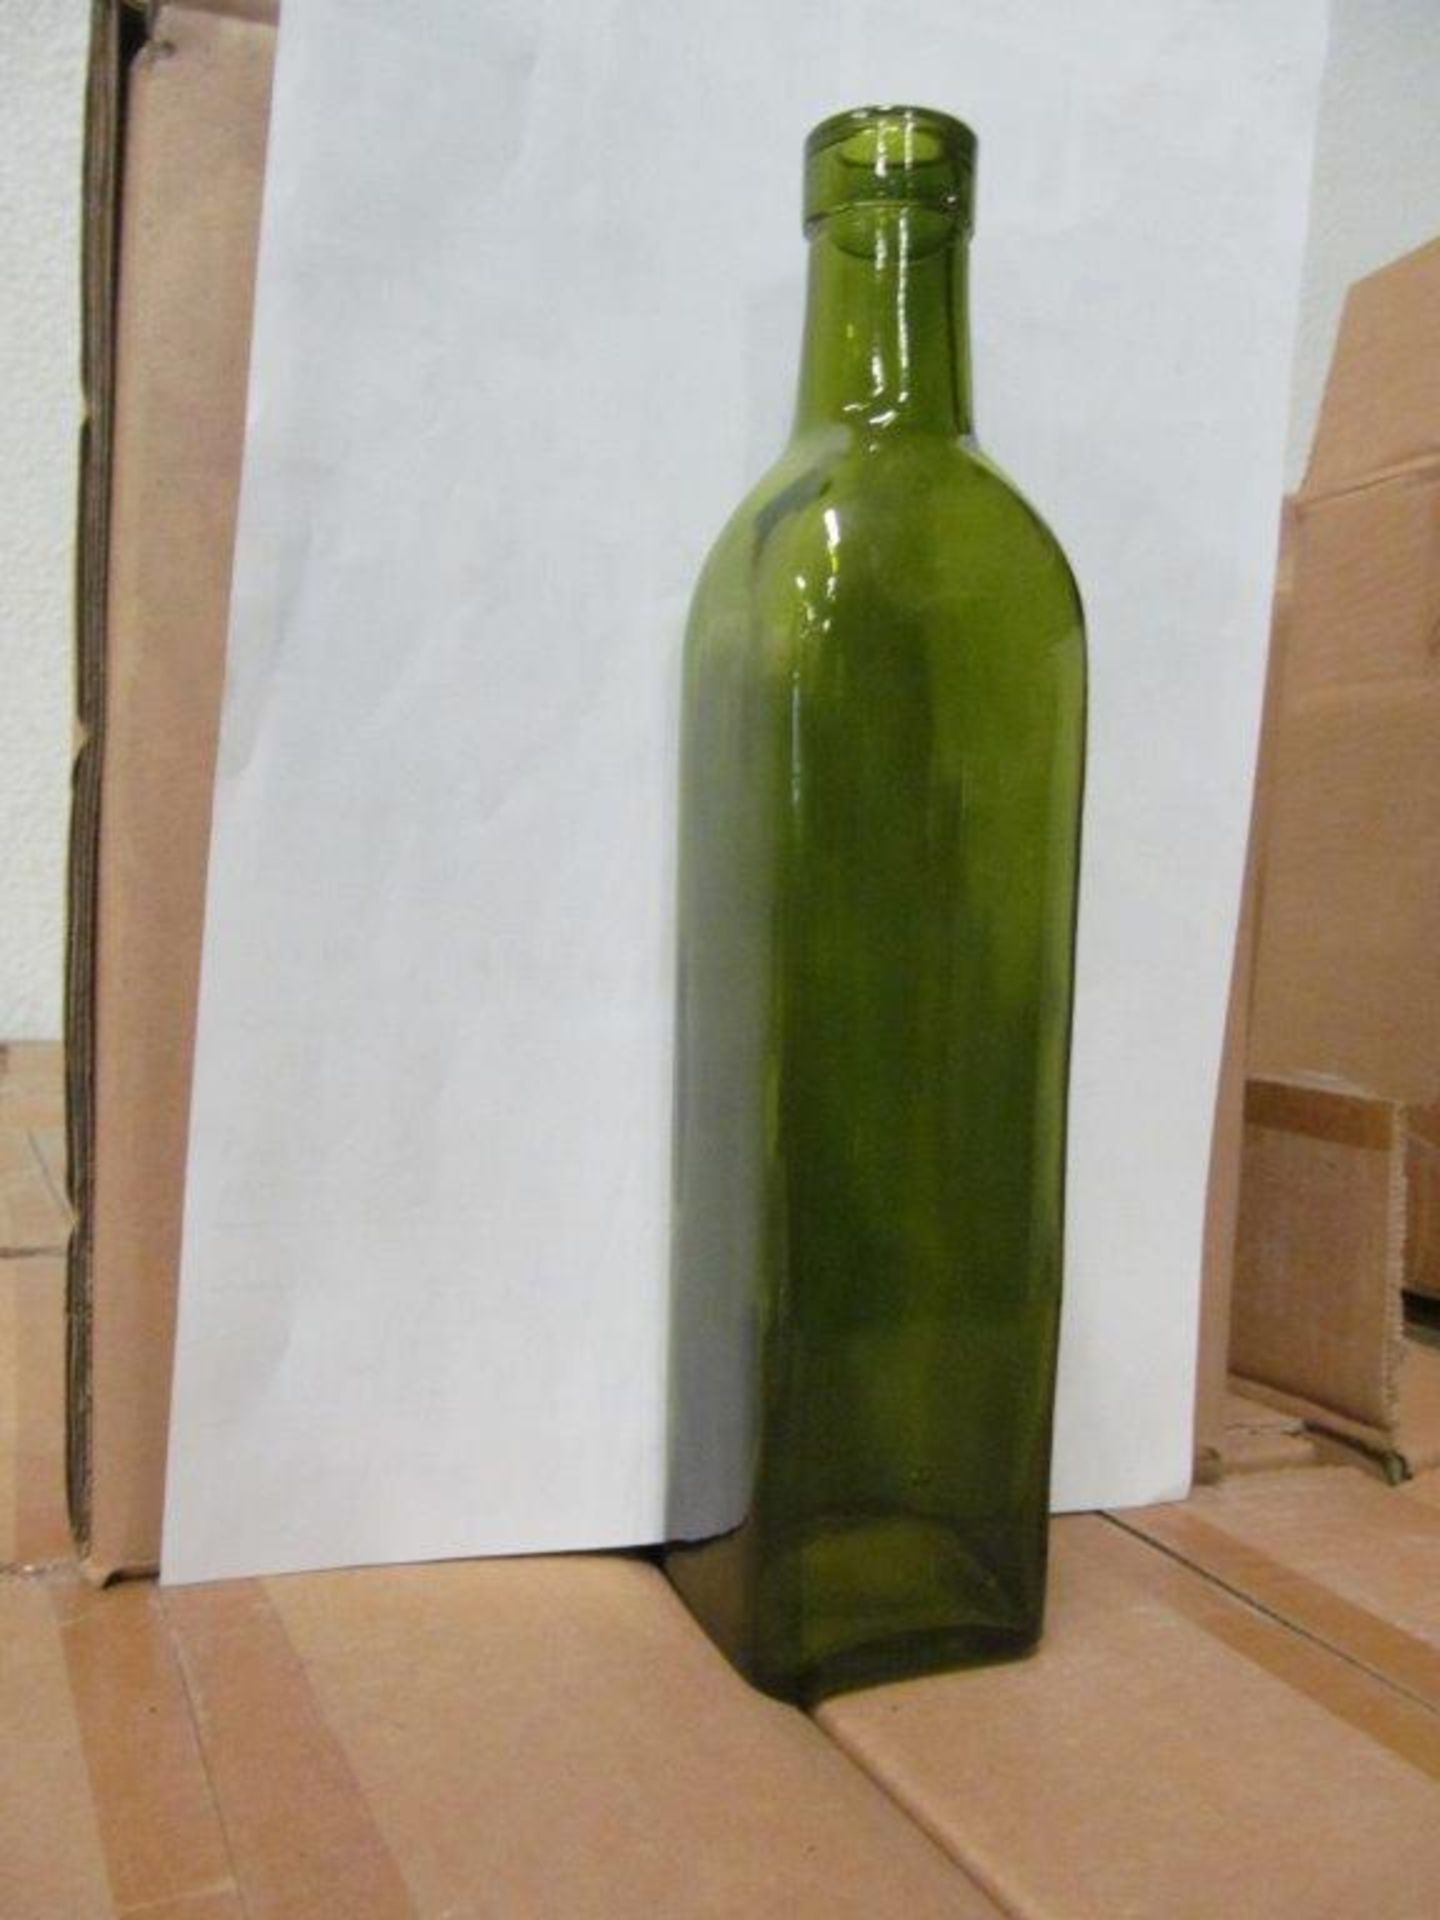 1 LOT GREEN BOTTLES - SIZE 2 1/4" Square X 10 1/4" High, Total Quantity - 4612